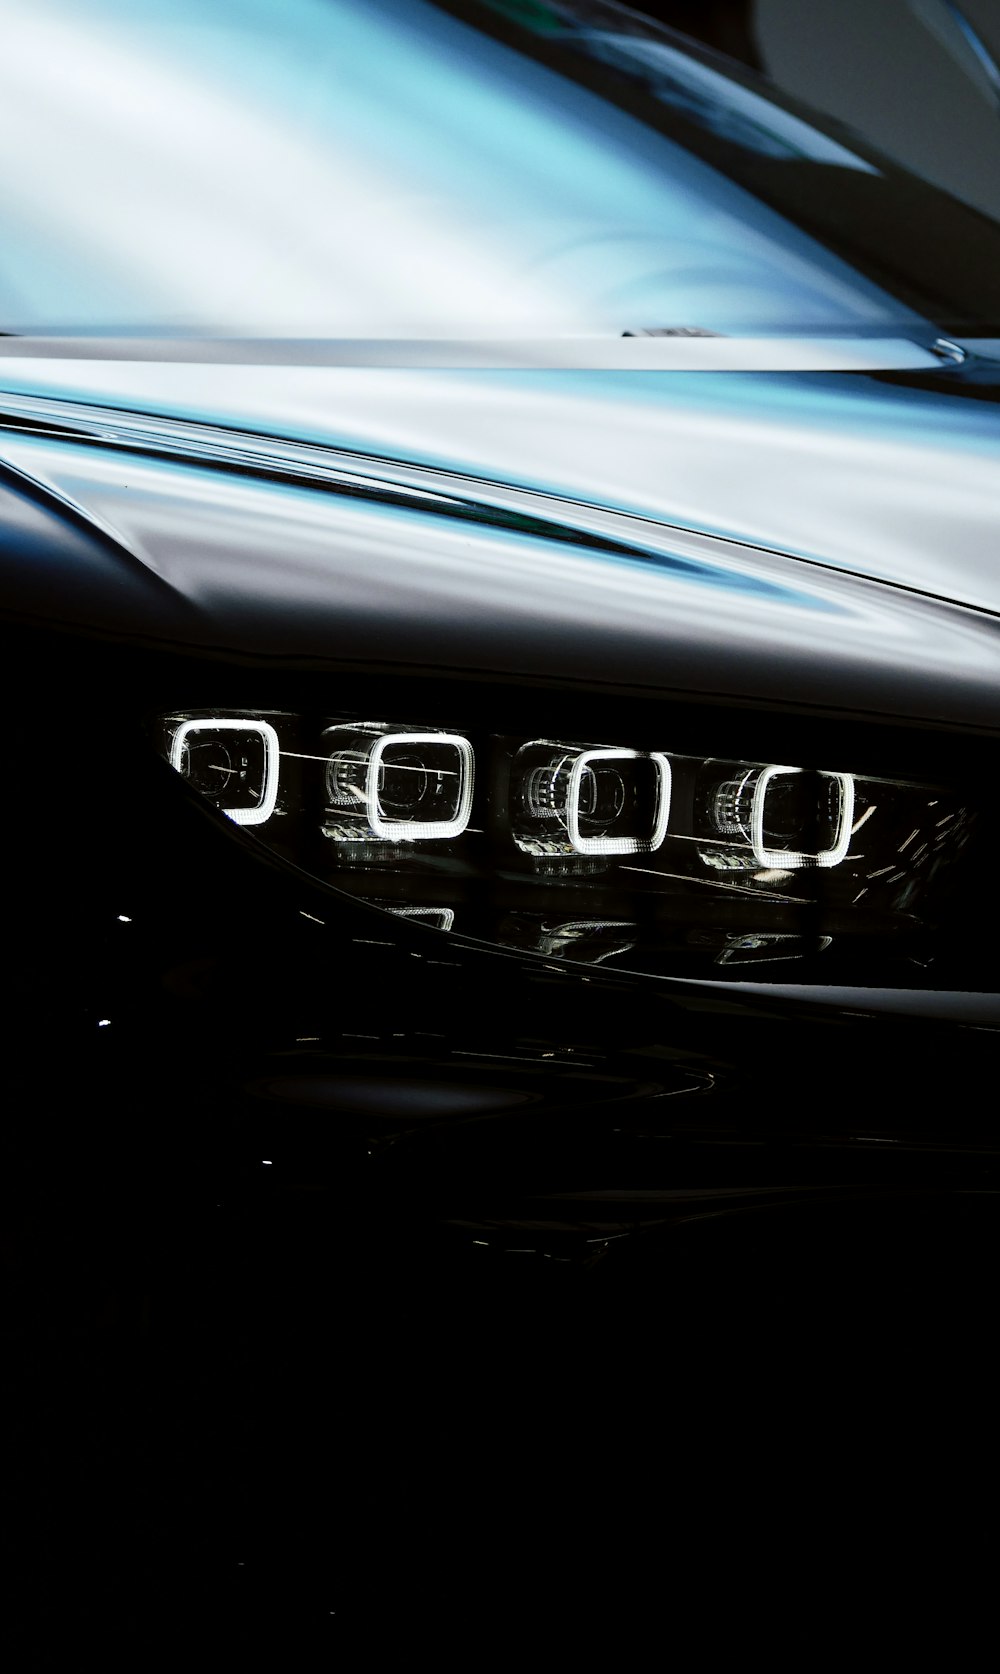 a close up of the front lights of a car